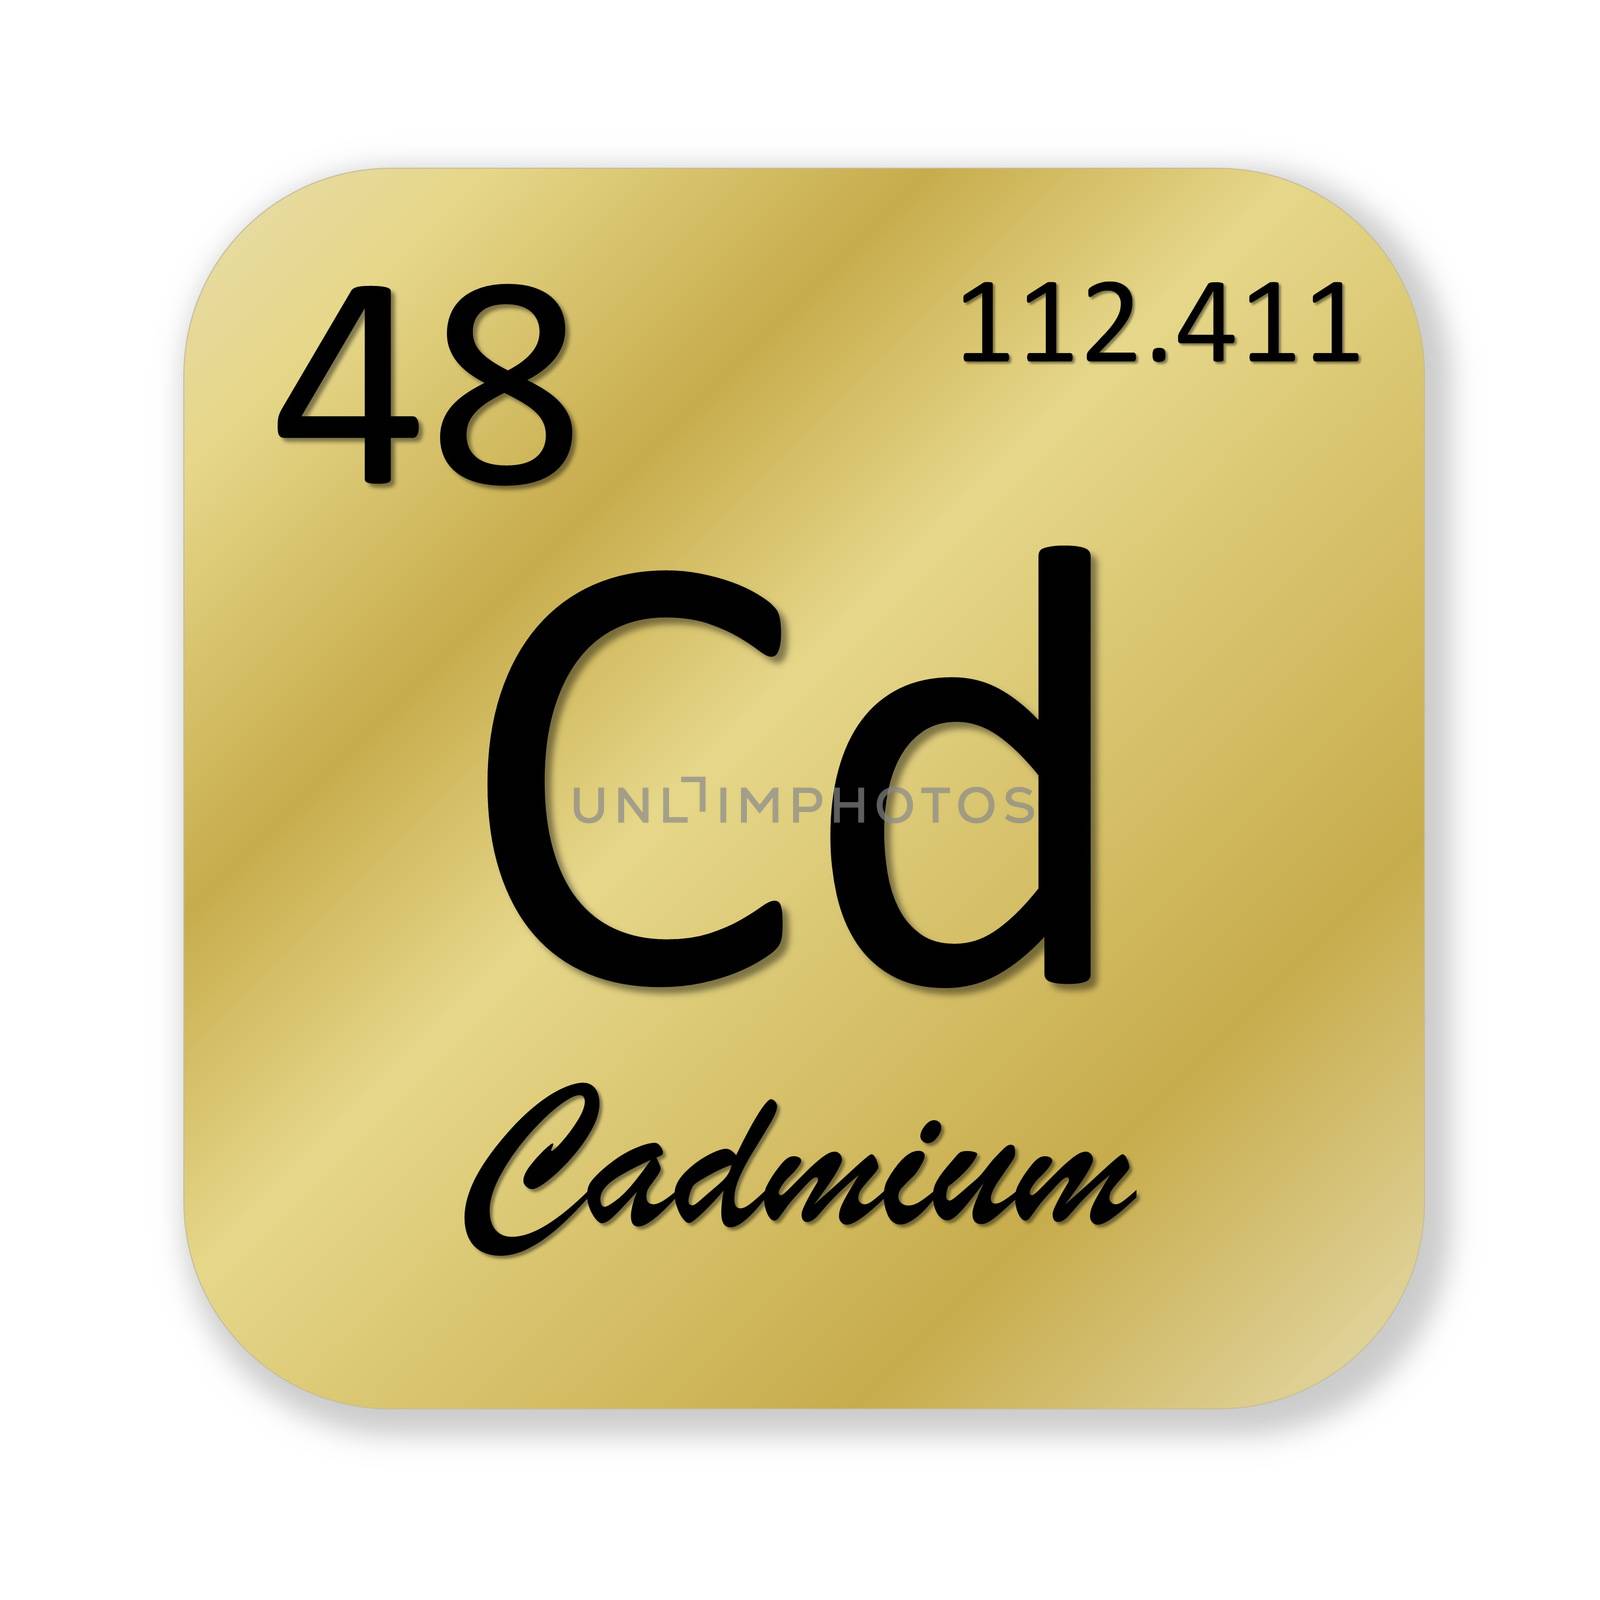 Black cadmium element into golden square shape isolated in white background